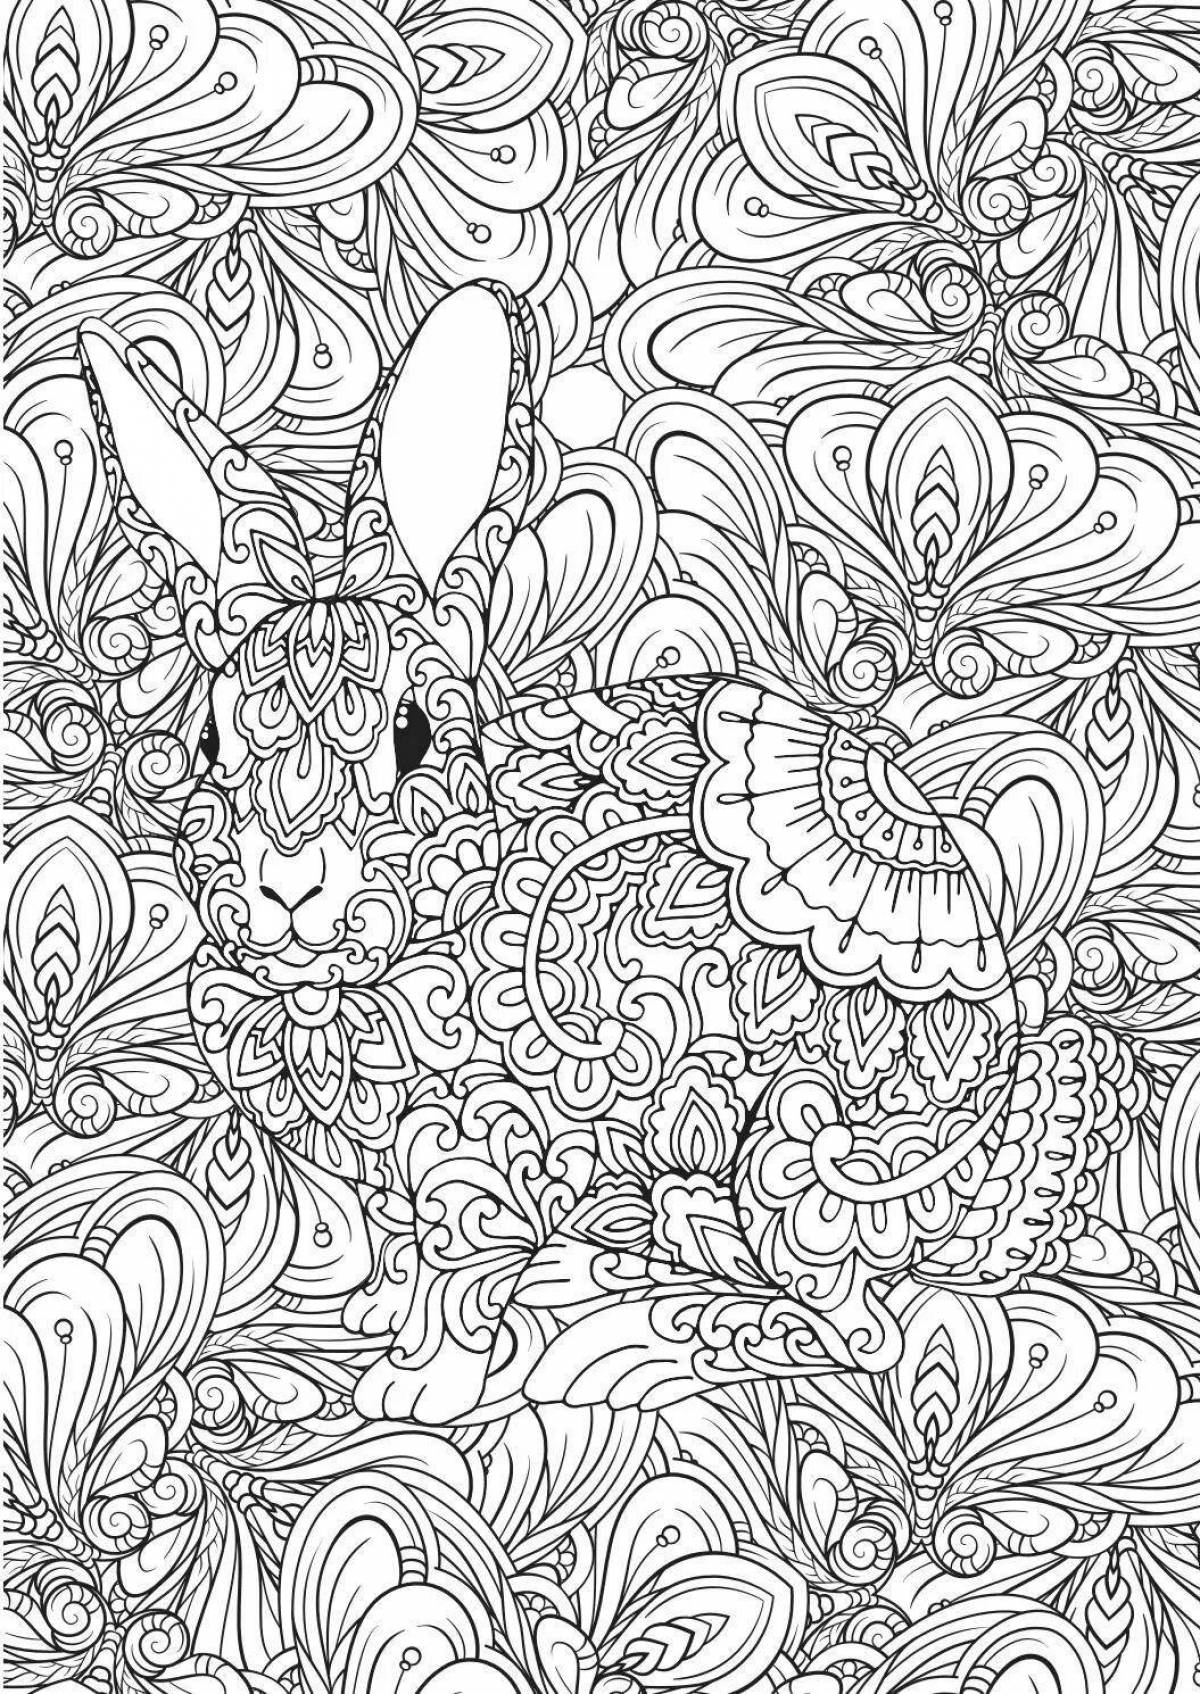 Super antistress soothing coloring page